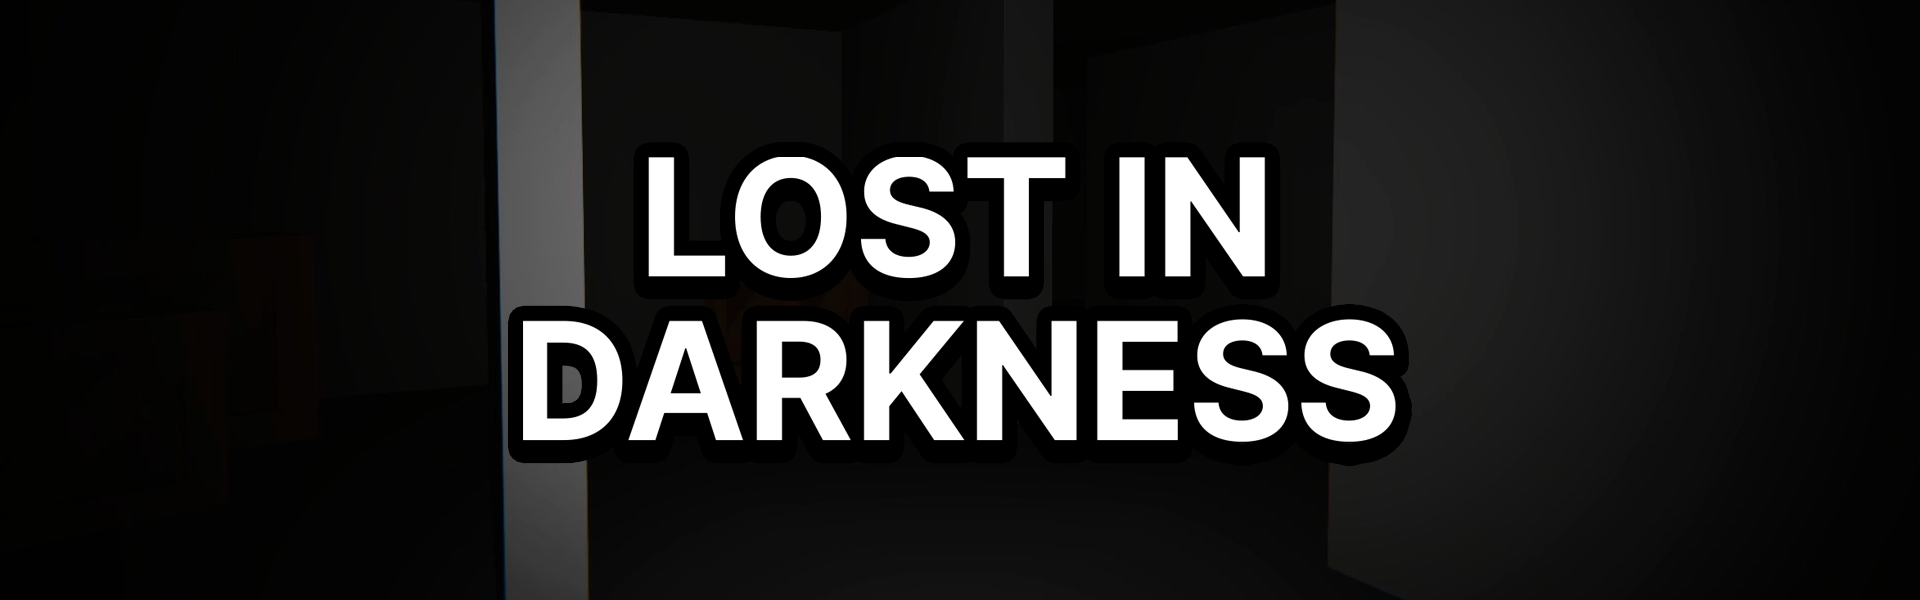 Lost in Darkness